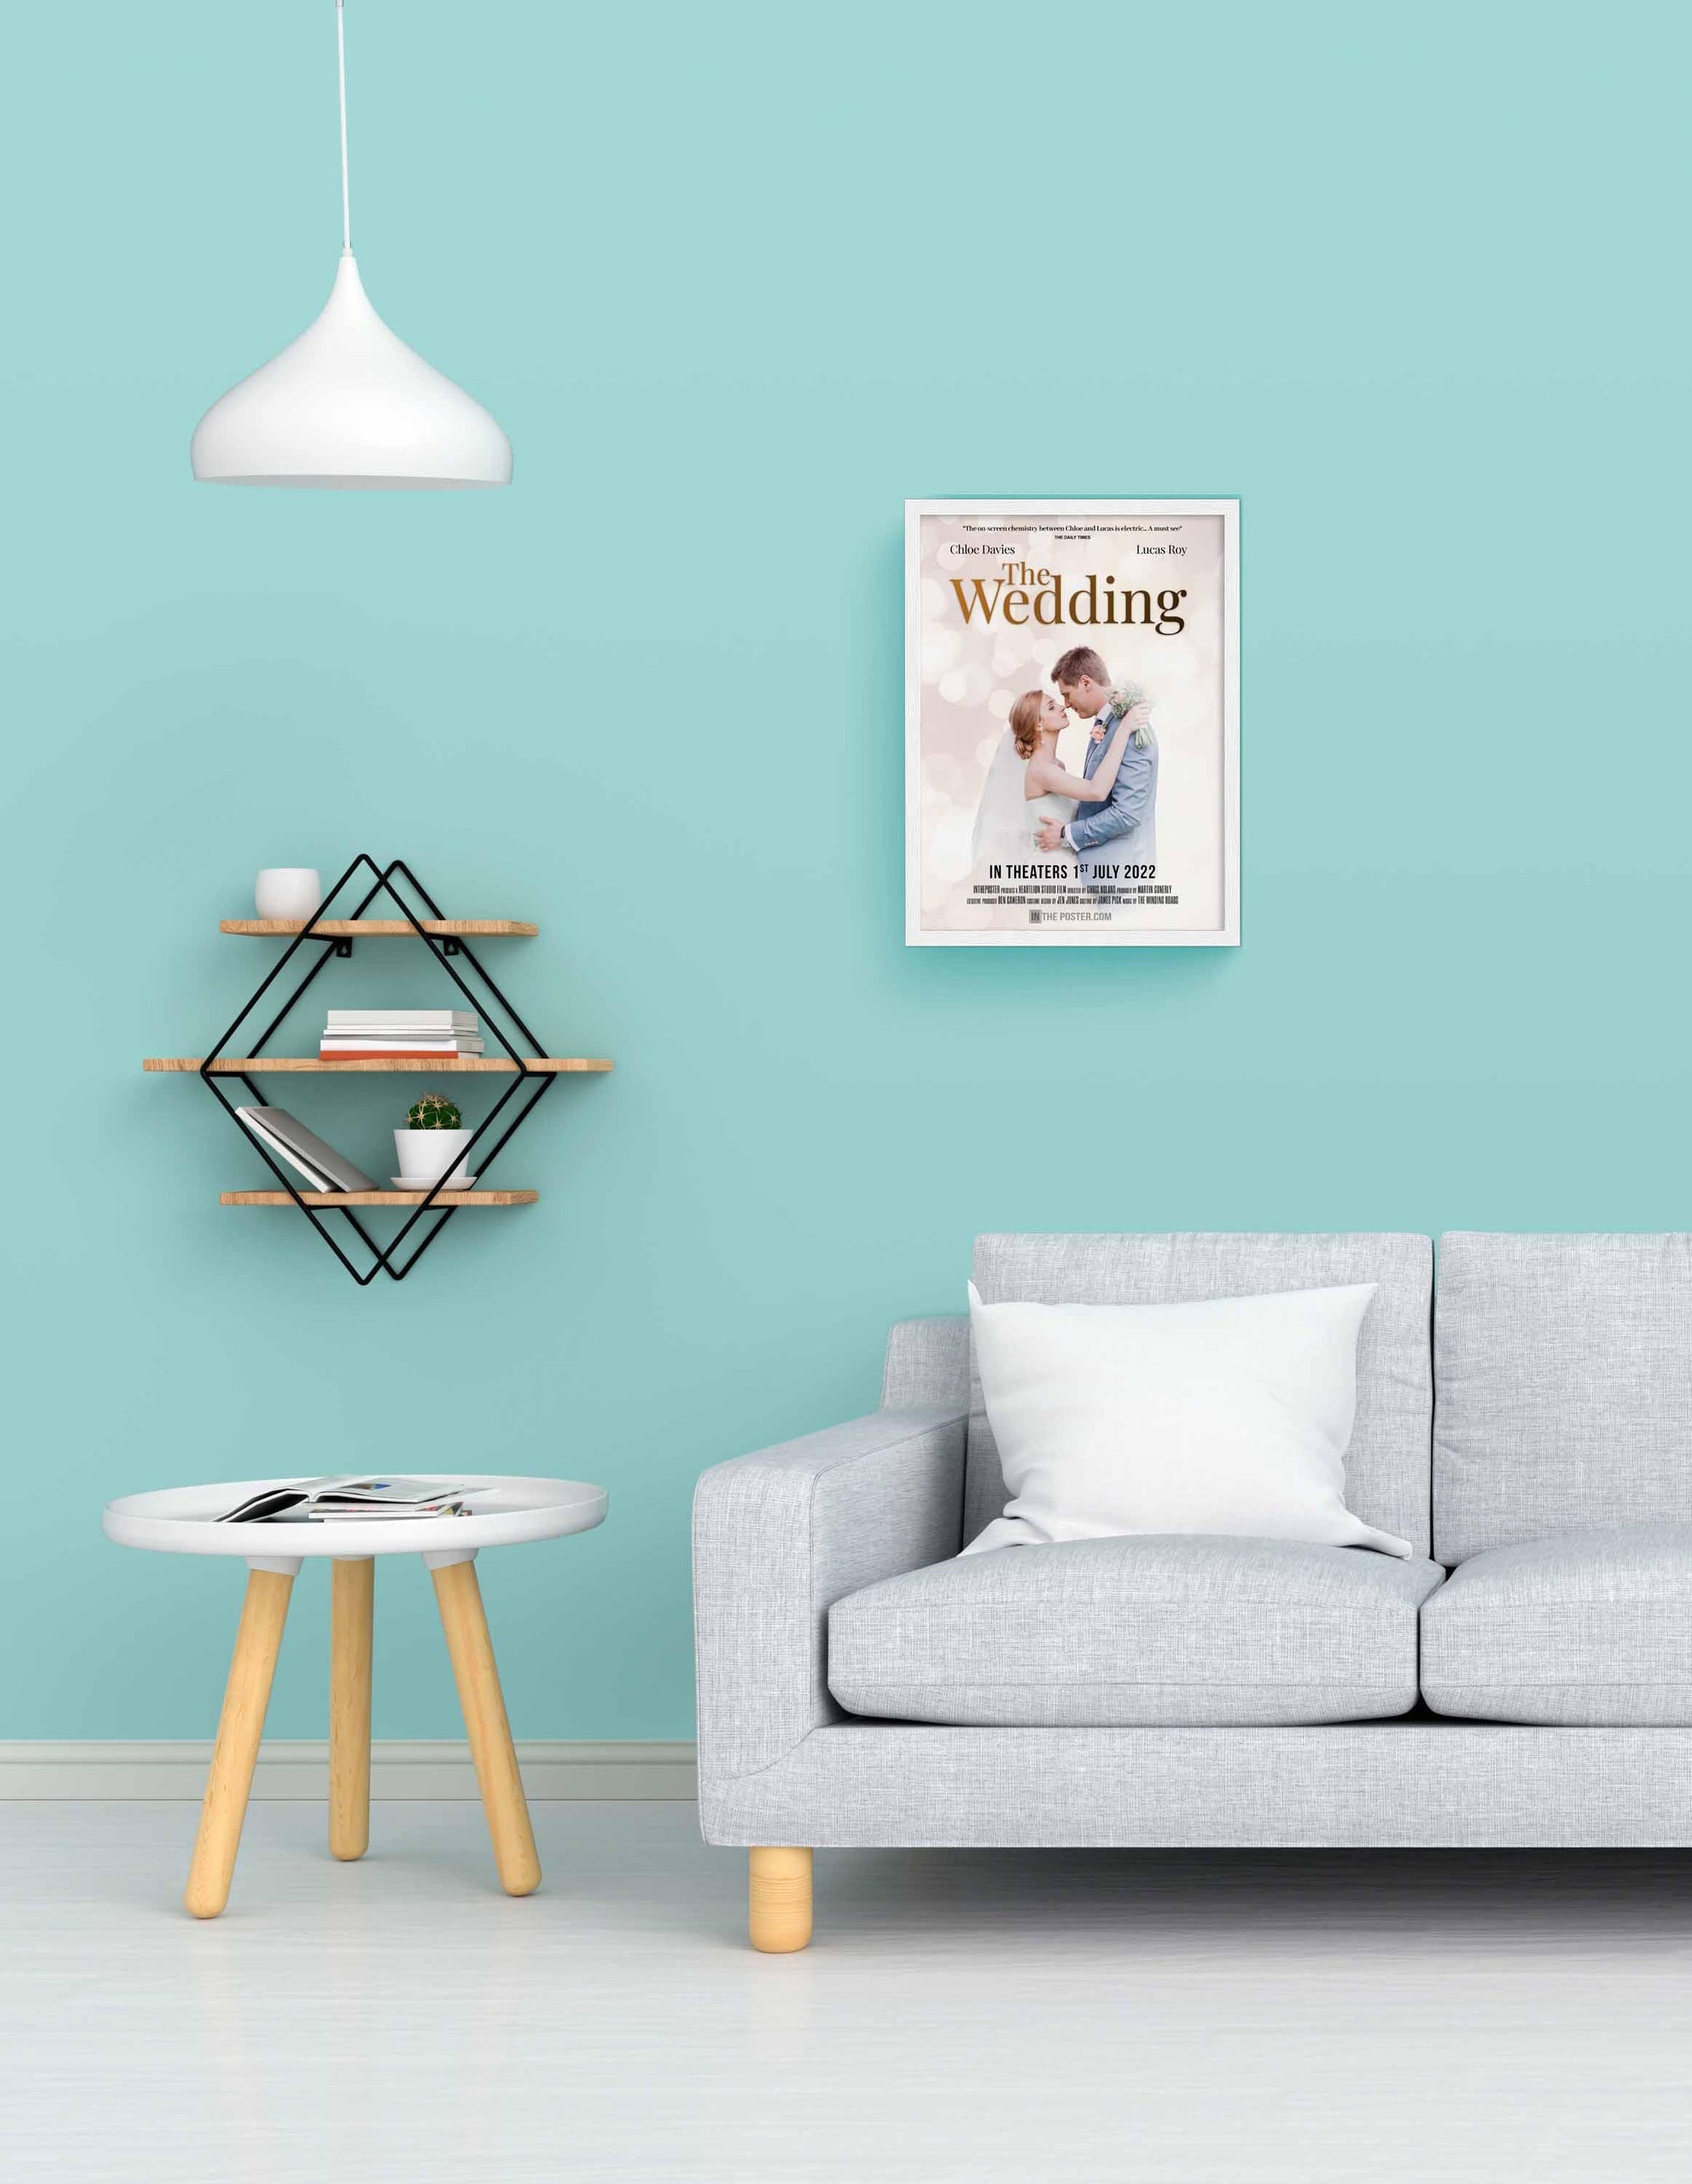 The Wedding - Movie Poster in Small White Frame on a blue wall above a grey sofa